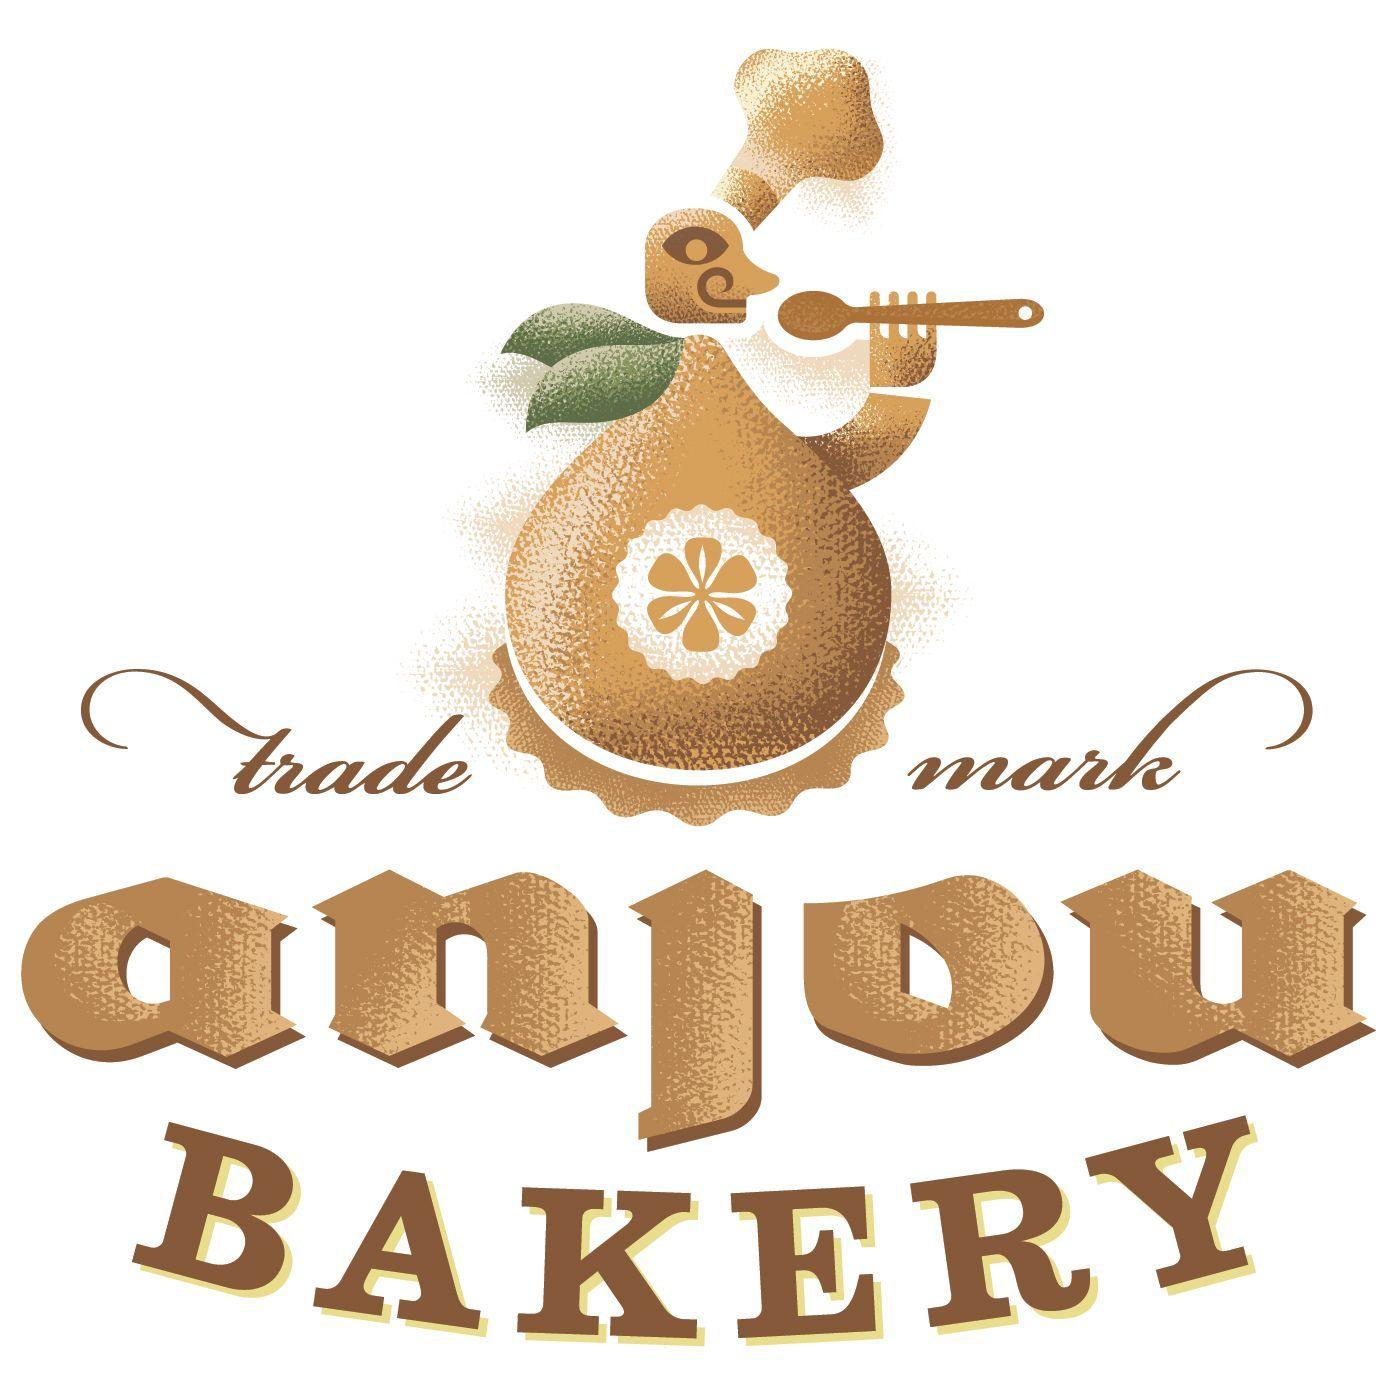 Tan and Green Logo - Gardner Design - Anjou Bakery logo design. The image of a pear and a ...